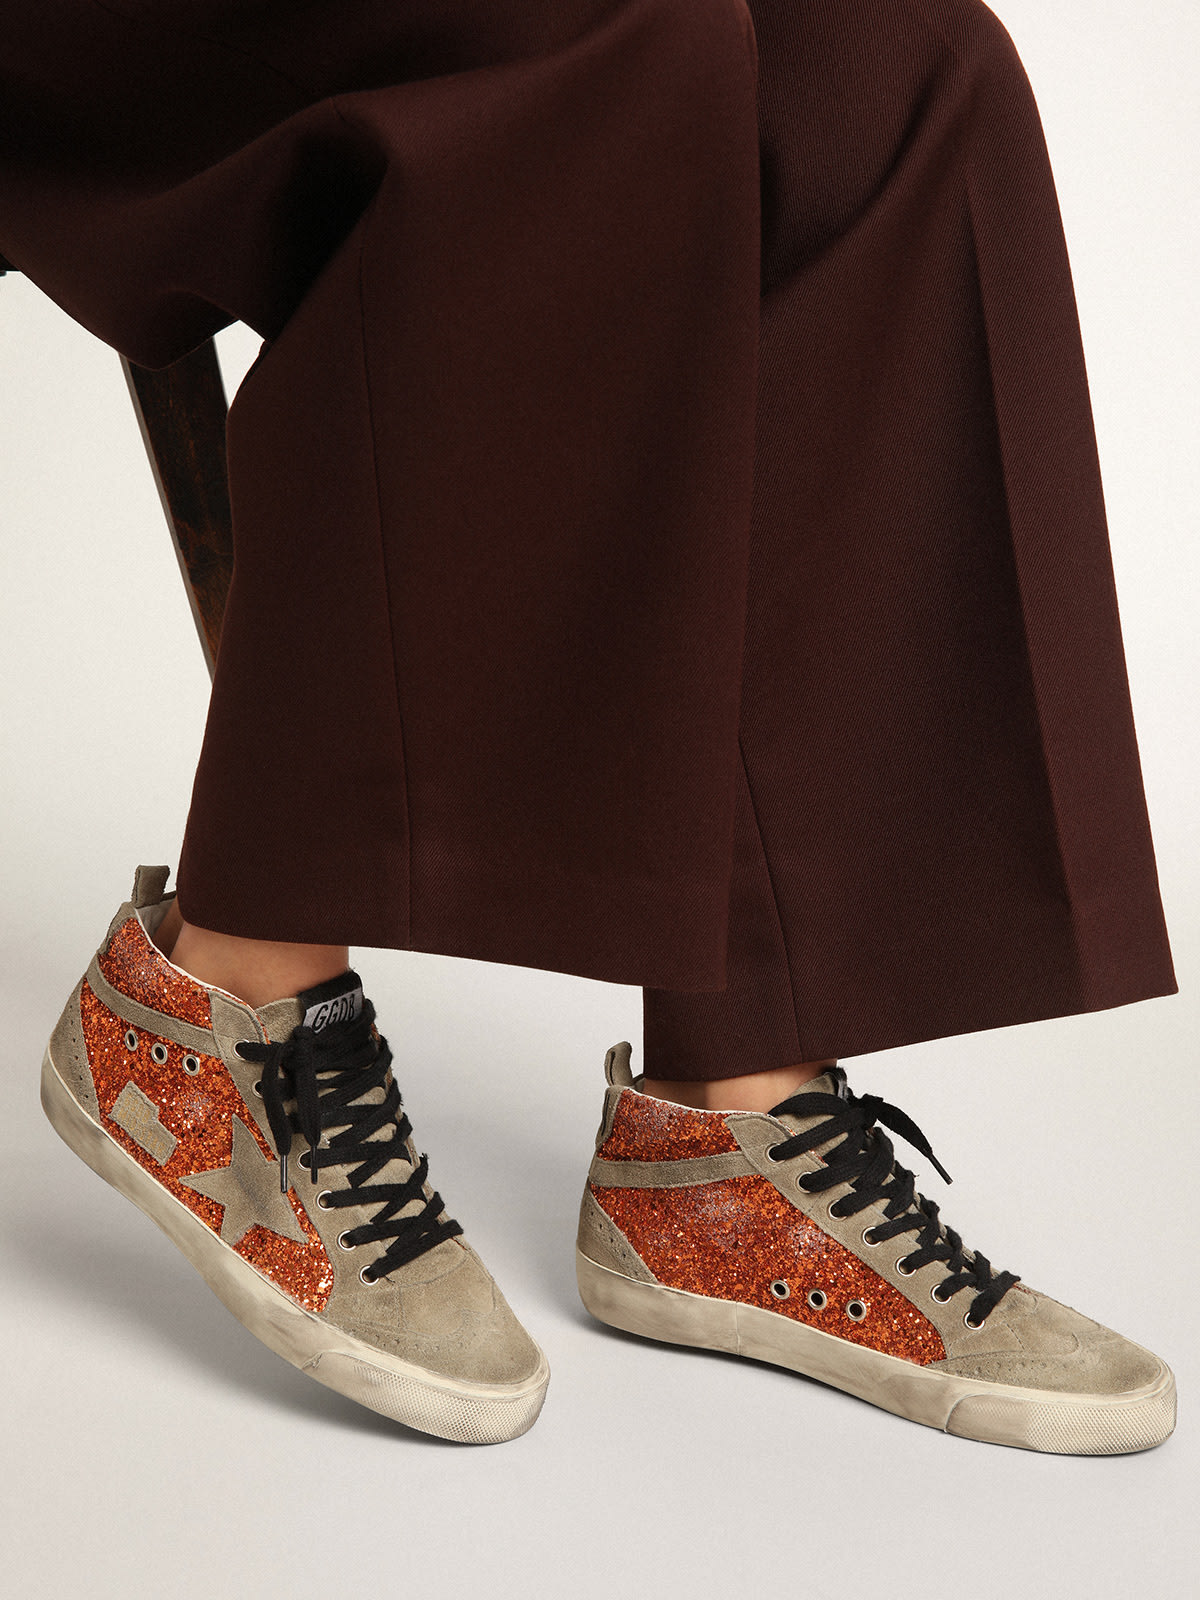 Golden Goose - Mid Star in cinnamon glitter with ice-gray suede star and flash in 